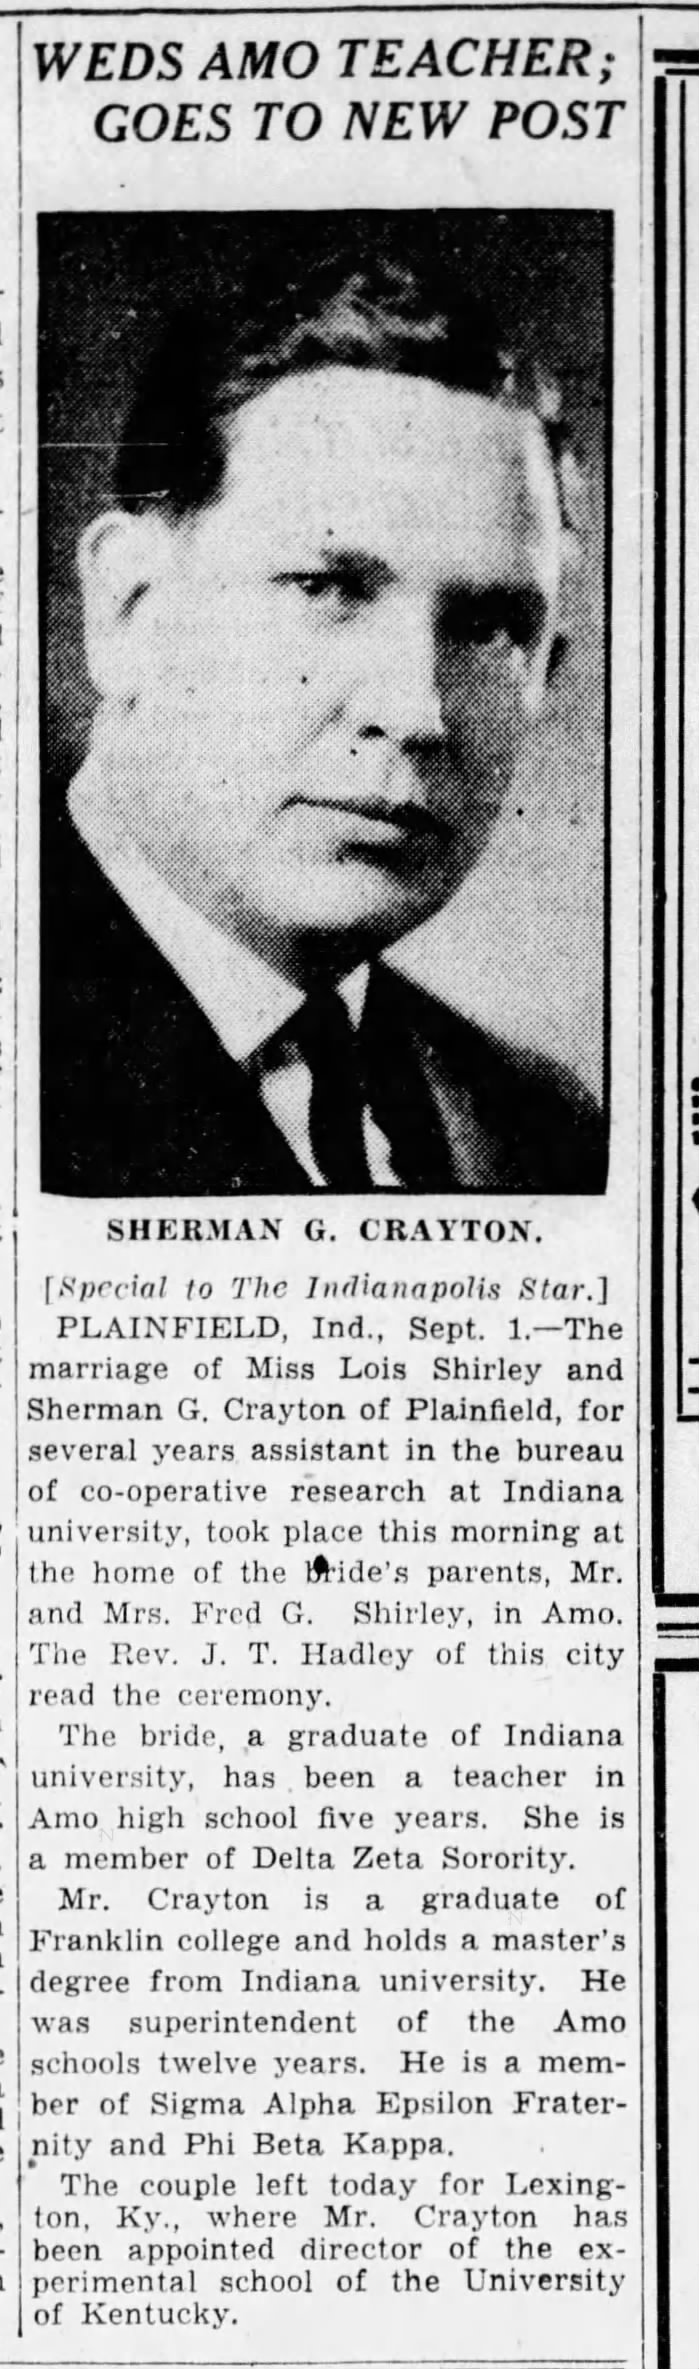 The Indianapolis Star 02 Sep 1930 pg 4 Weds Amo Teacher Goes to New Post Sherman Crayton